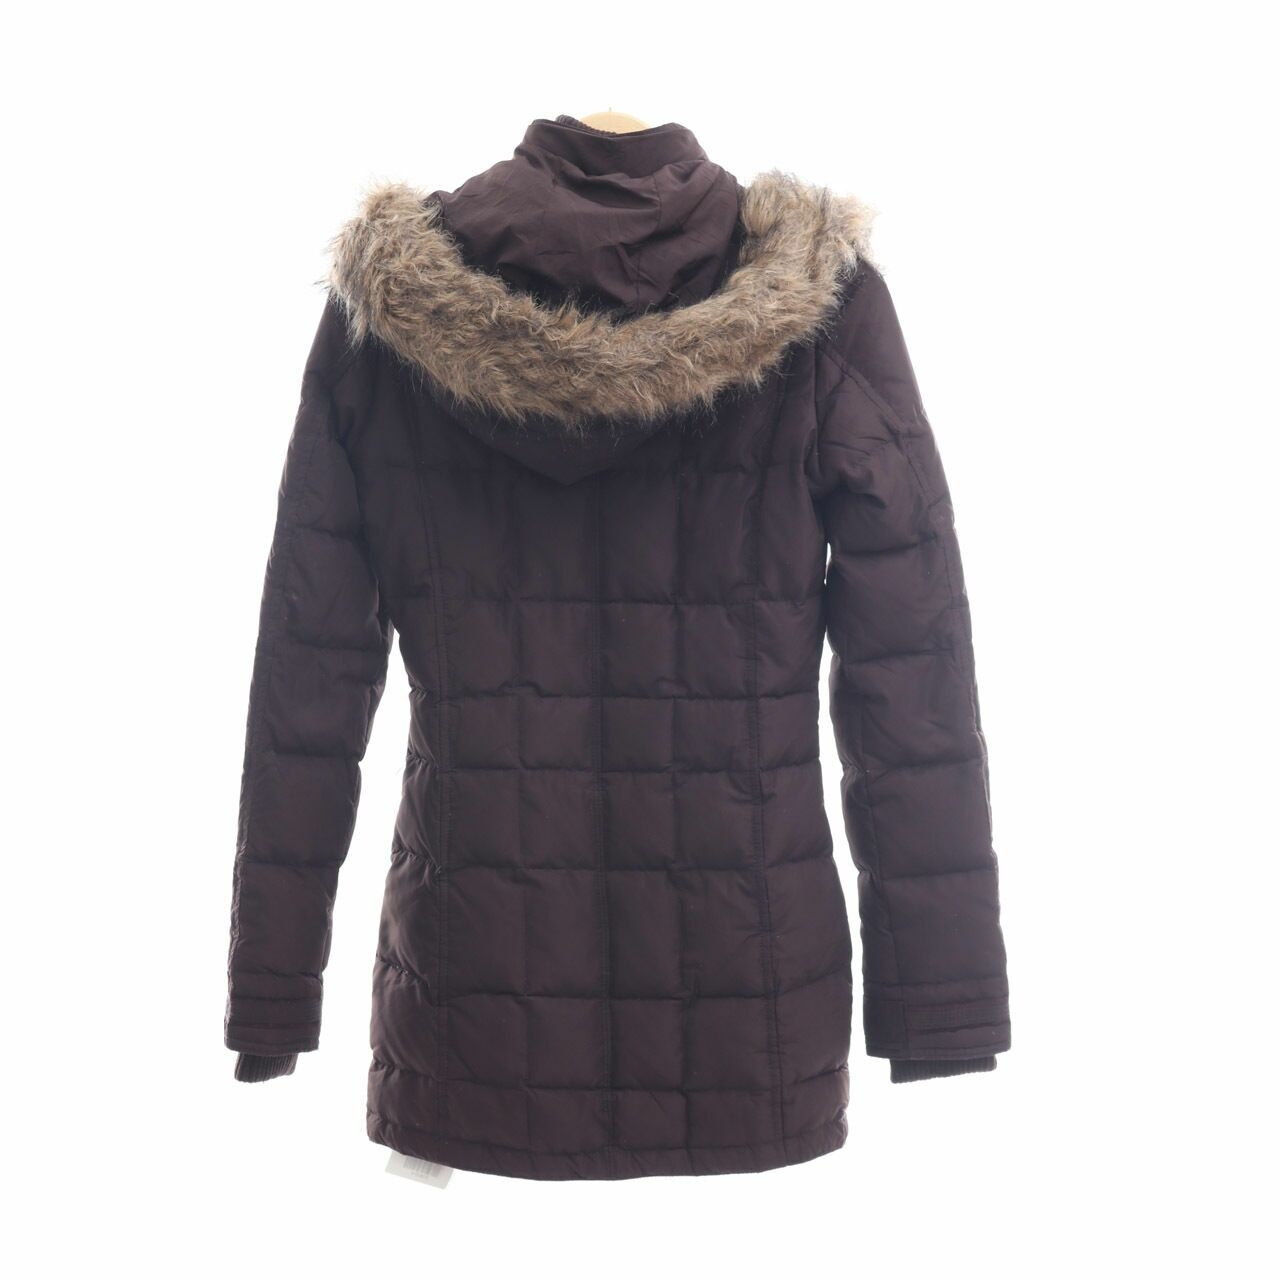 Abercrombie & Fitch Brown Coat